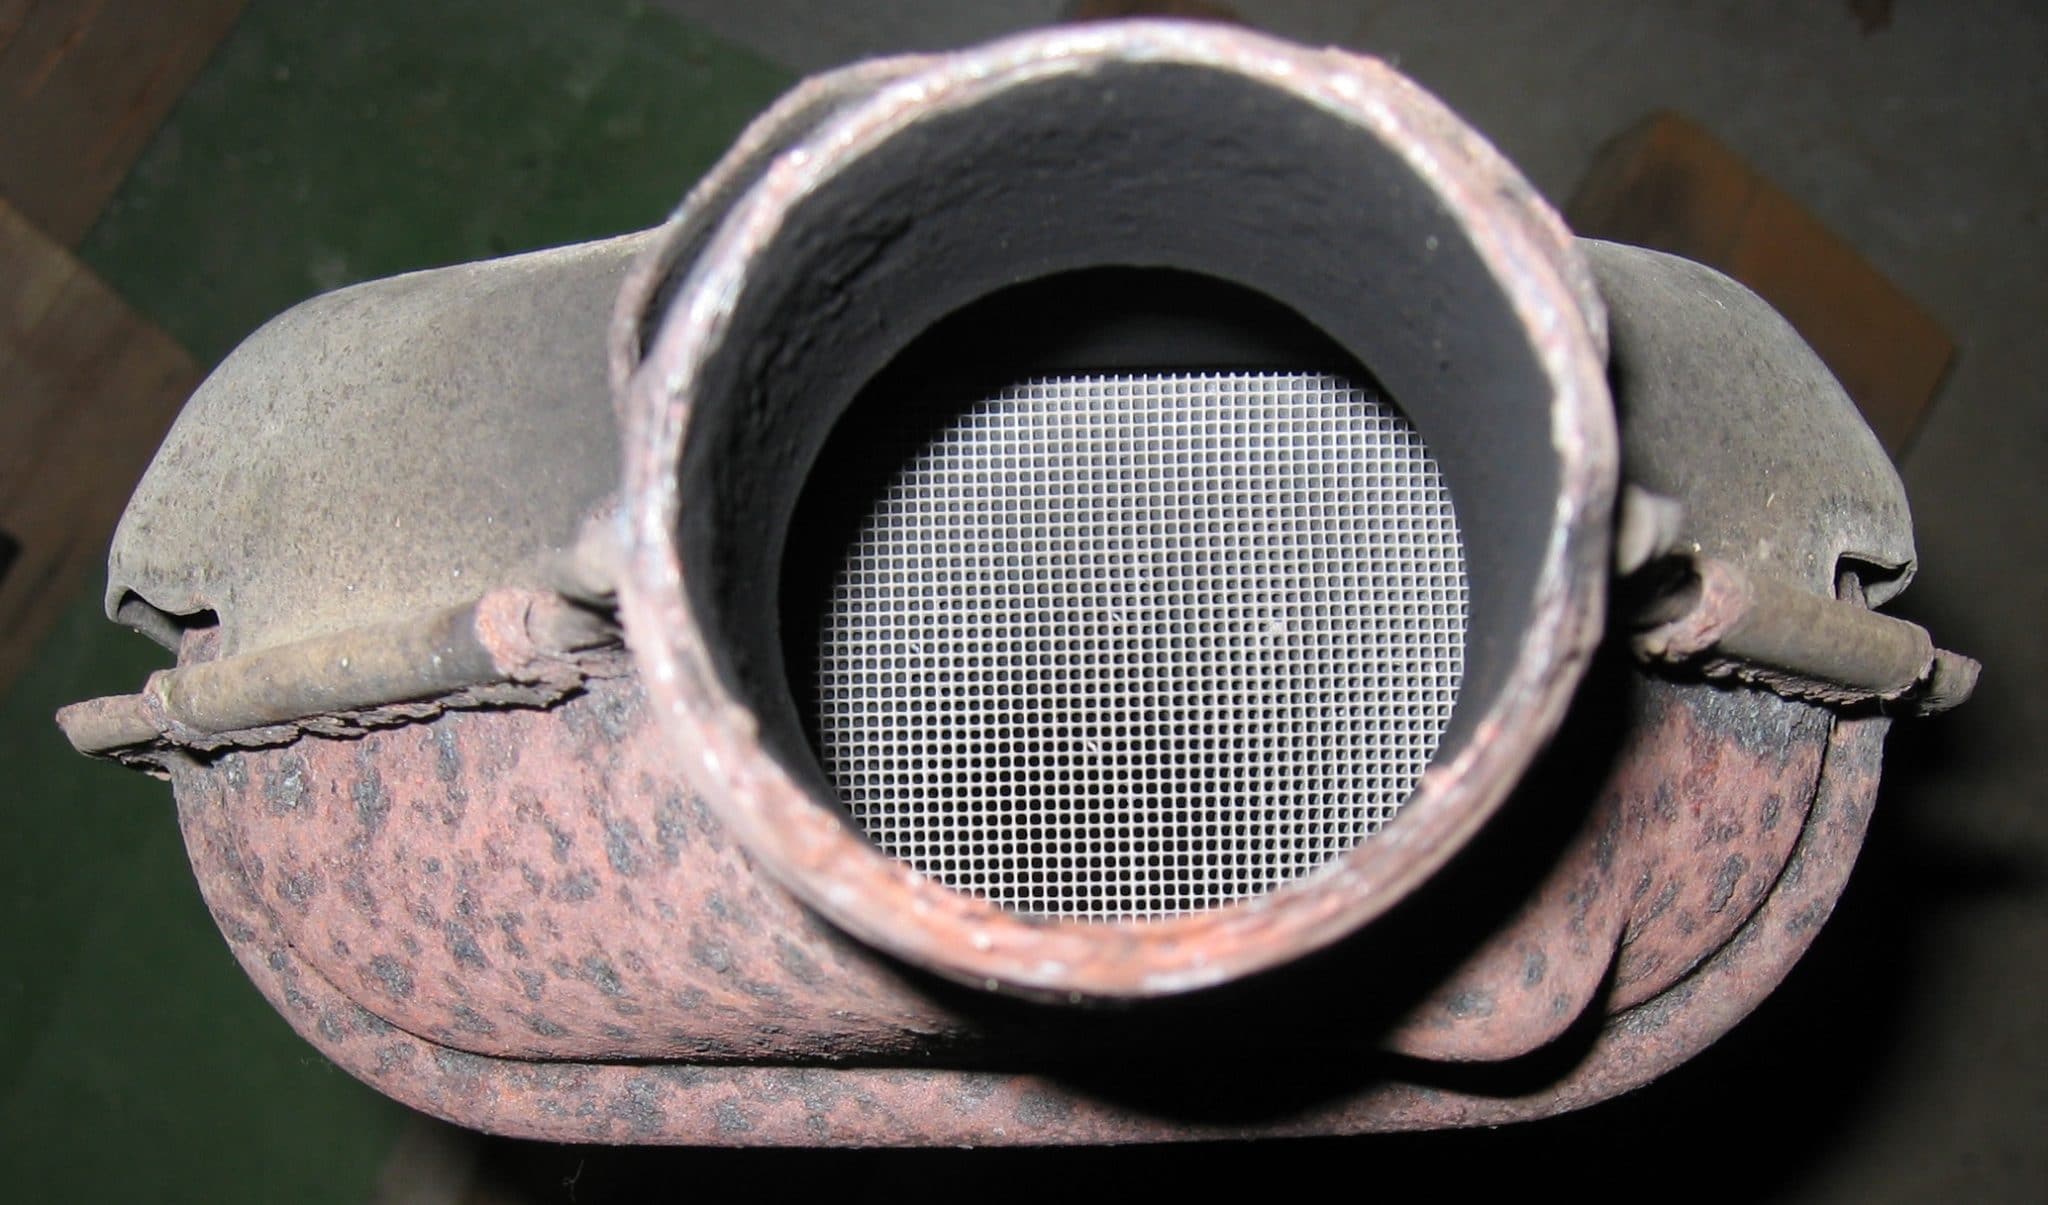 what is a catalytic converter